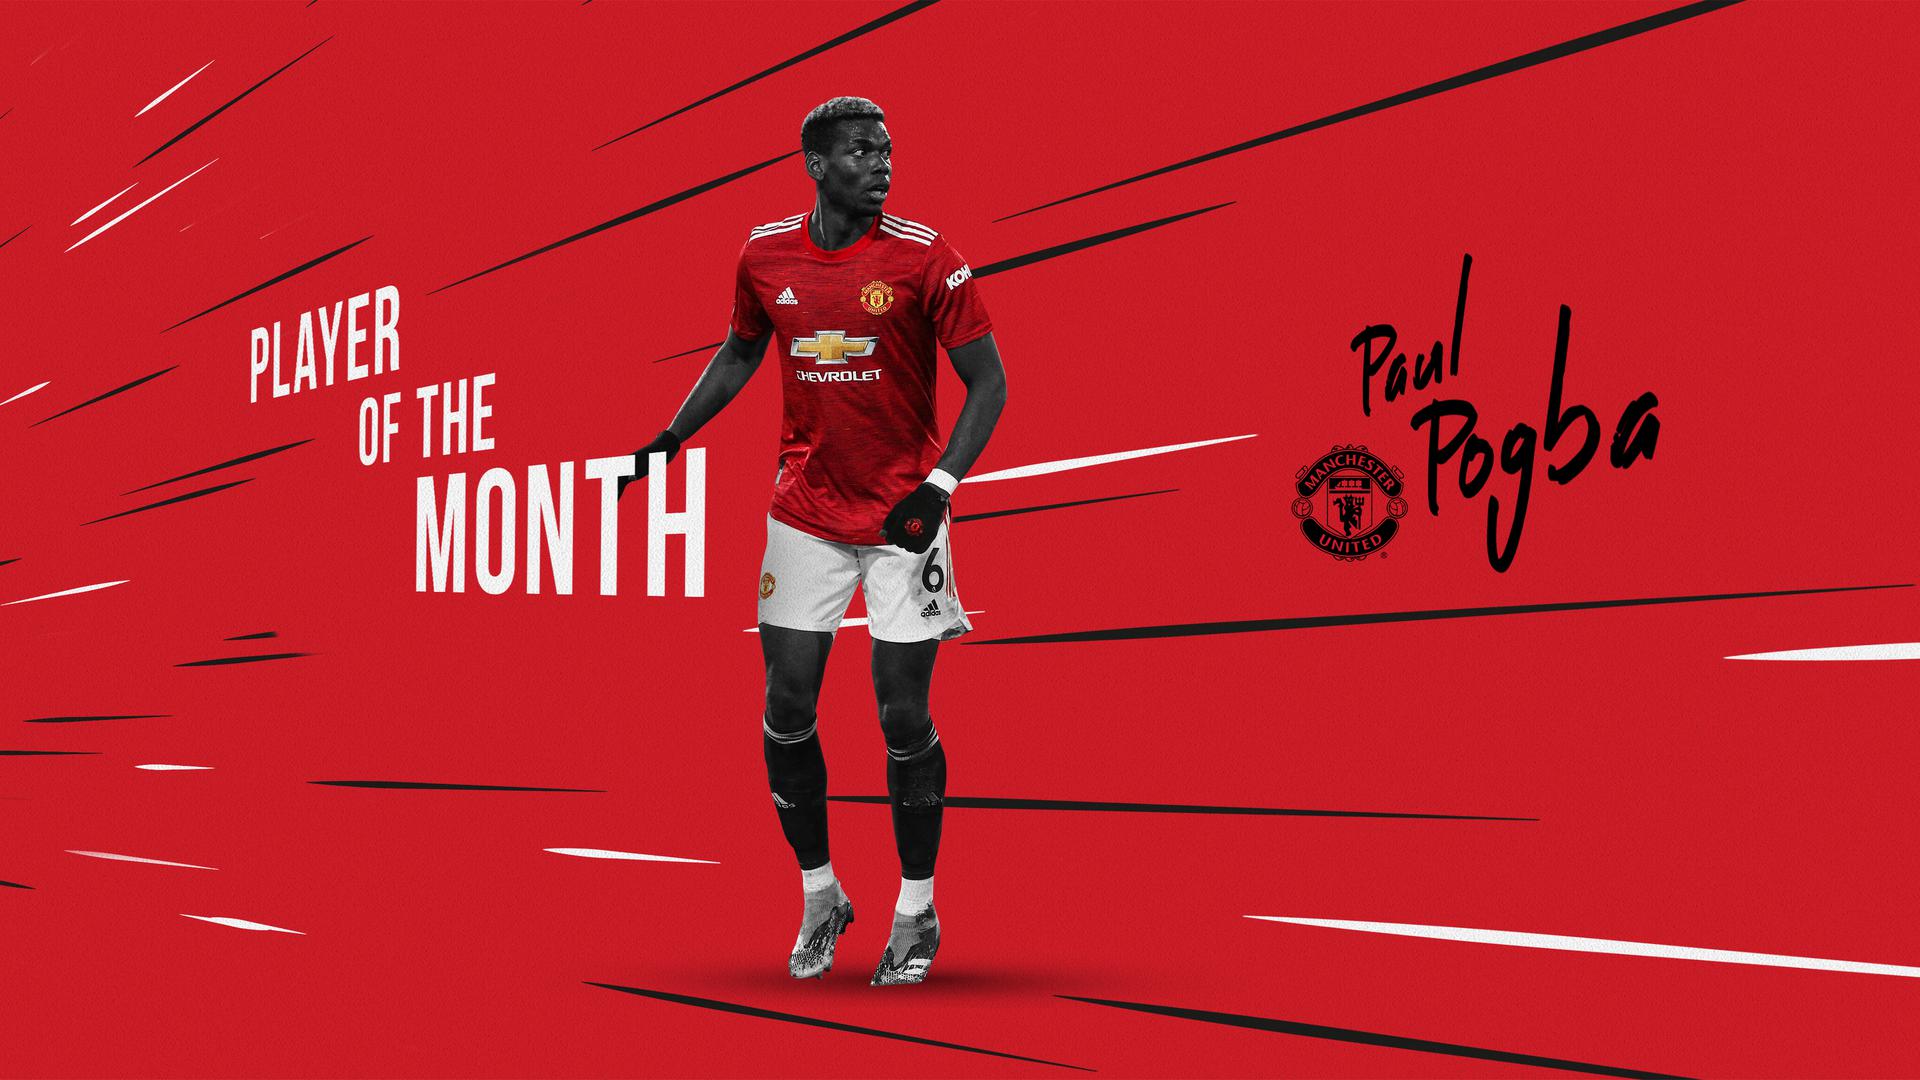 Paul Pogba voted Man United Player of the Month for January 2021